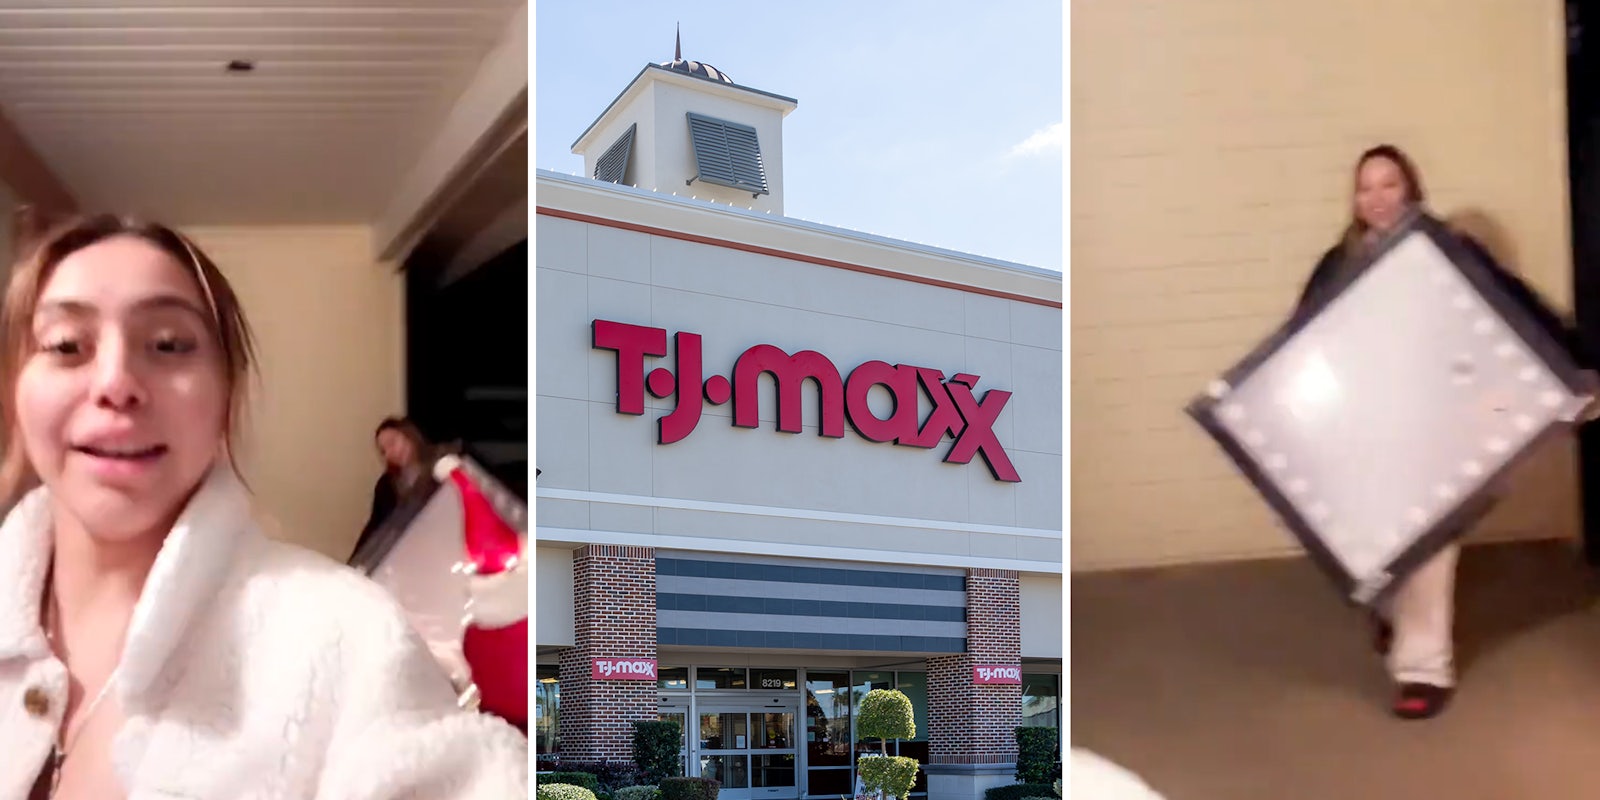 TJ Maxx customer spends $150 on a mirror. She was shocked upon opening the box